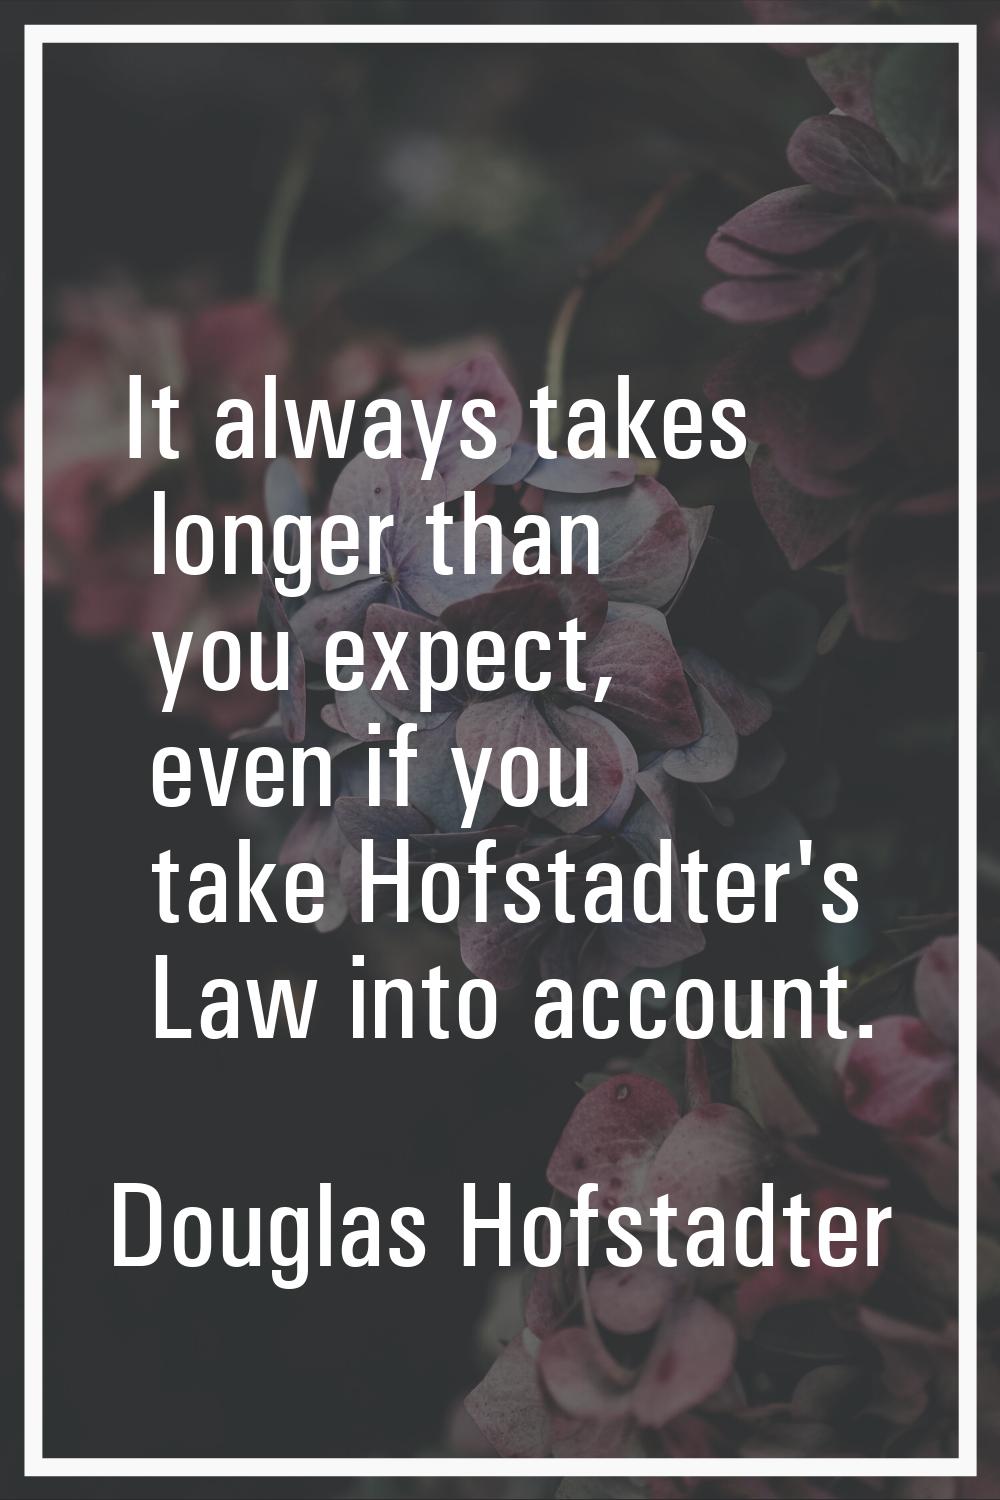 It always takes longer than you expect, even if you take Hofstadter's Law into account.